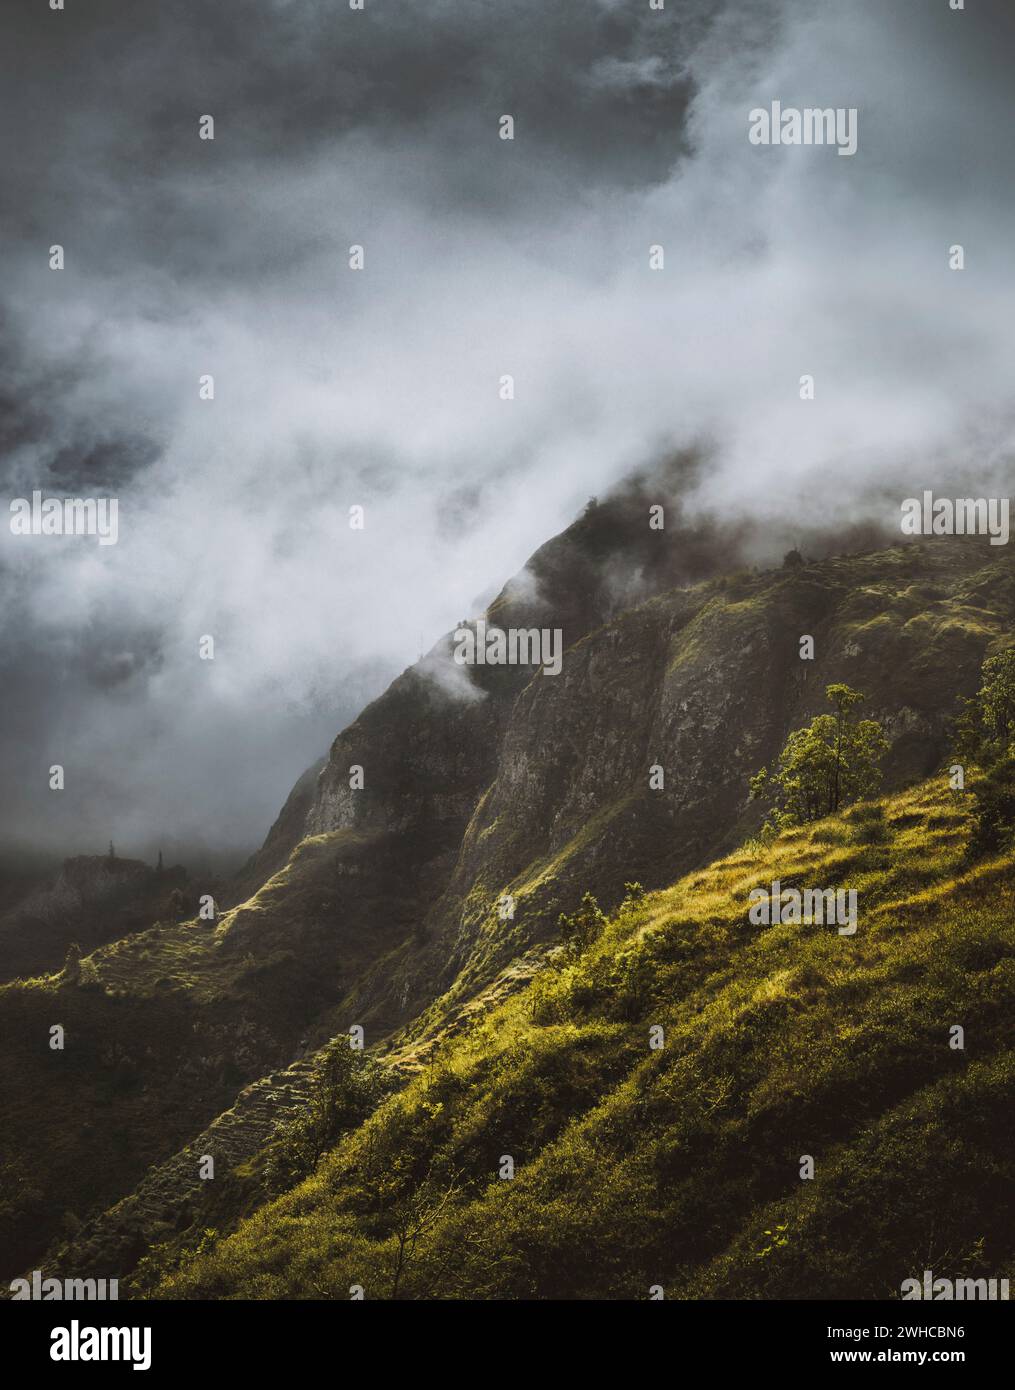 Stunning scenery with mist flowing over huge mountain slope and spilling into the green valley. Santo Antao Cape Verde Cabo Verde. Stock Photo